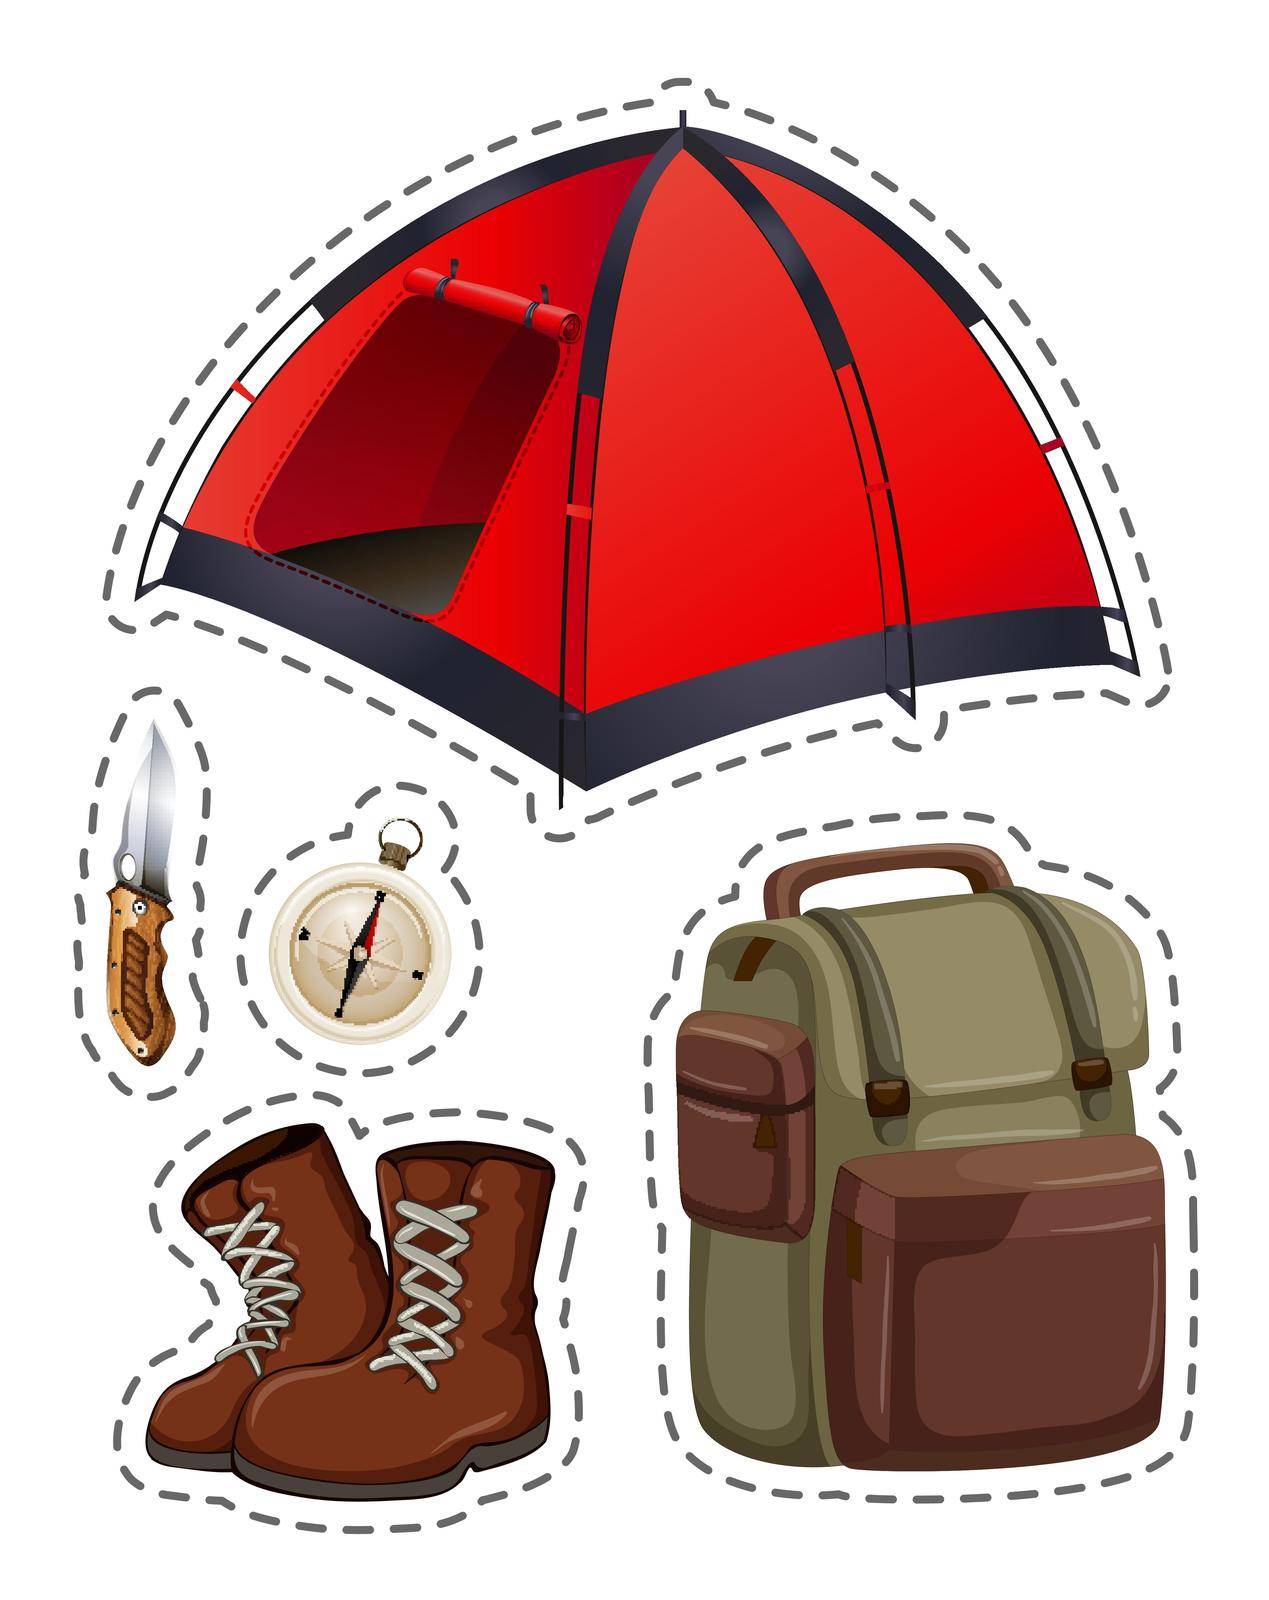 Camping set with tent and other objects by iimages